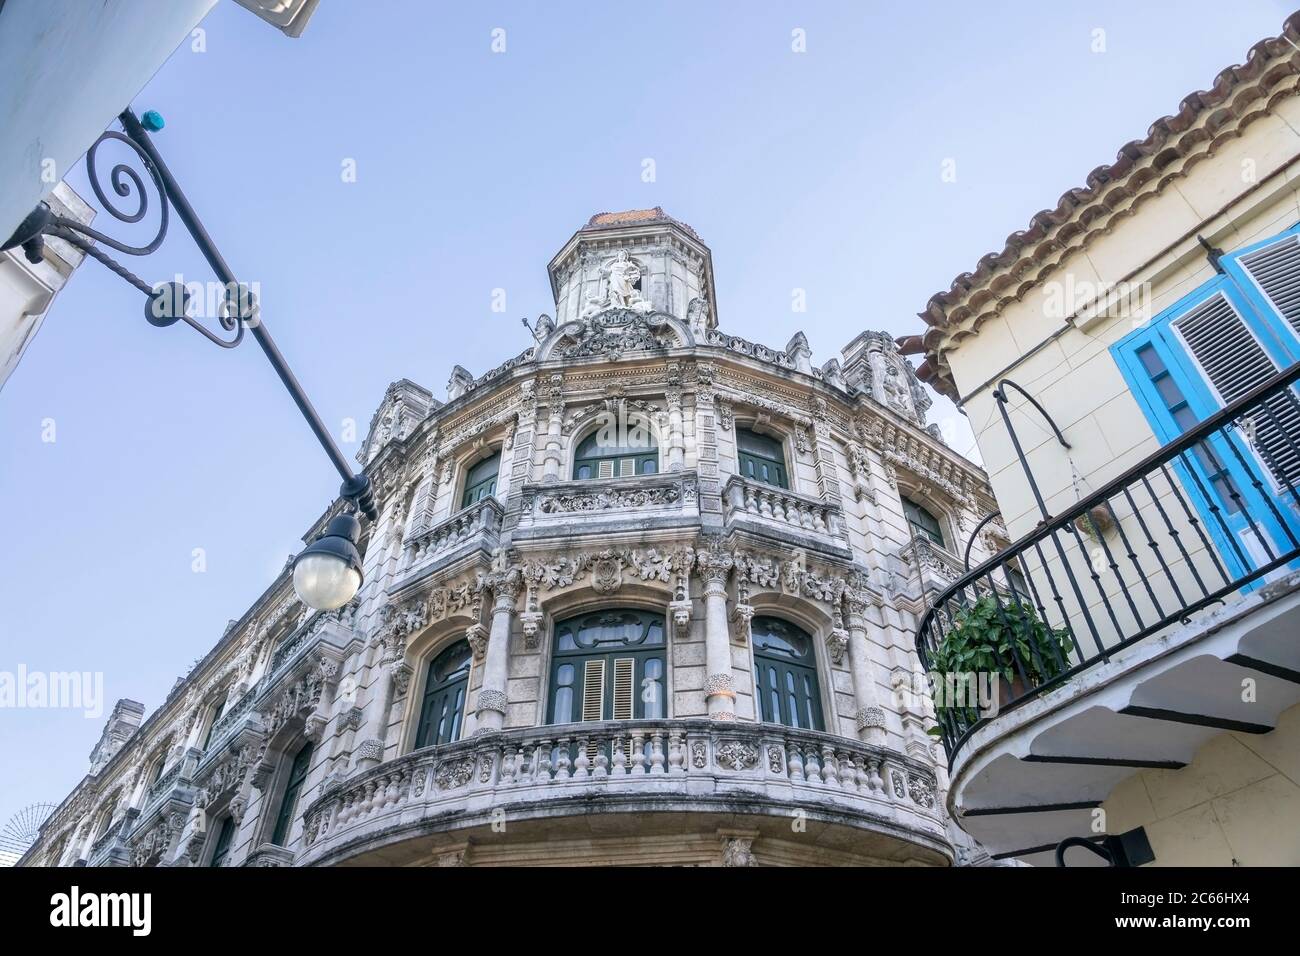 Cuba, Havana, balconies and facade, stucco decorated building in the old town Stock Photo